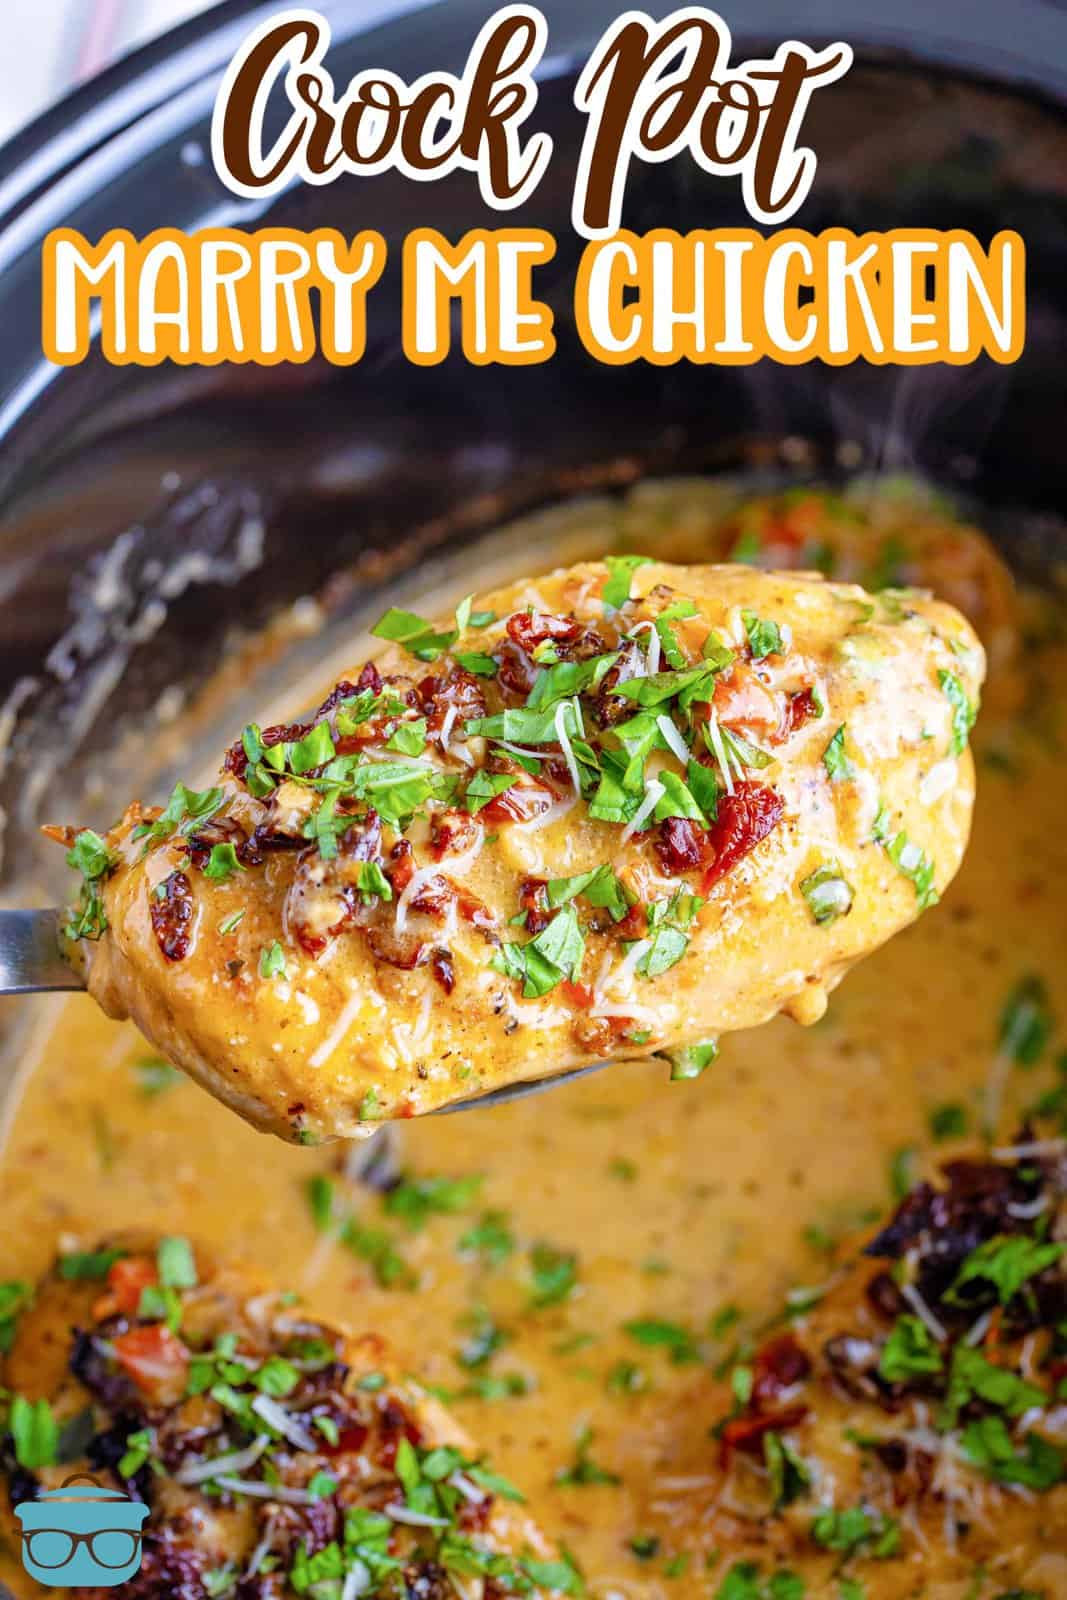 A piece of Marry Me Chicken on a serving utensil over a Crock Pot.